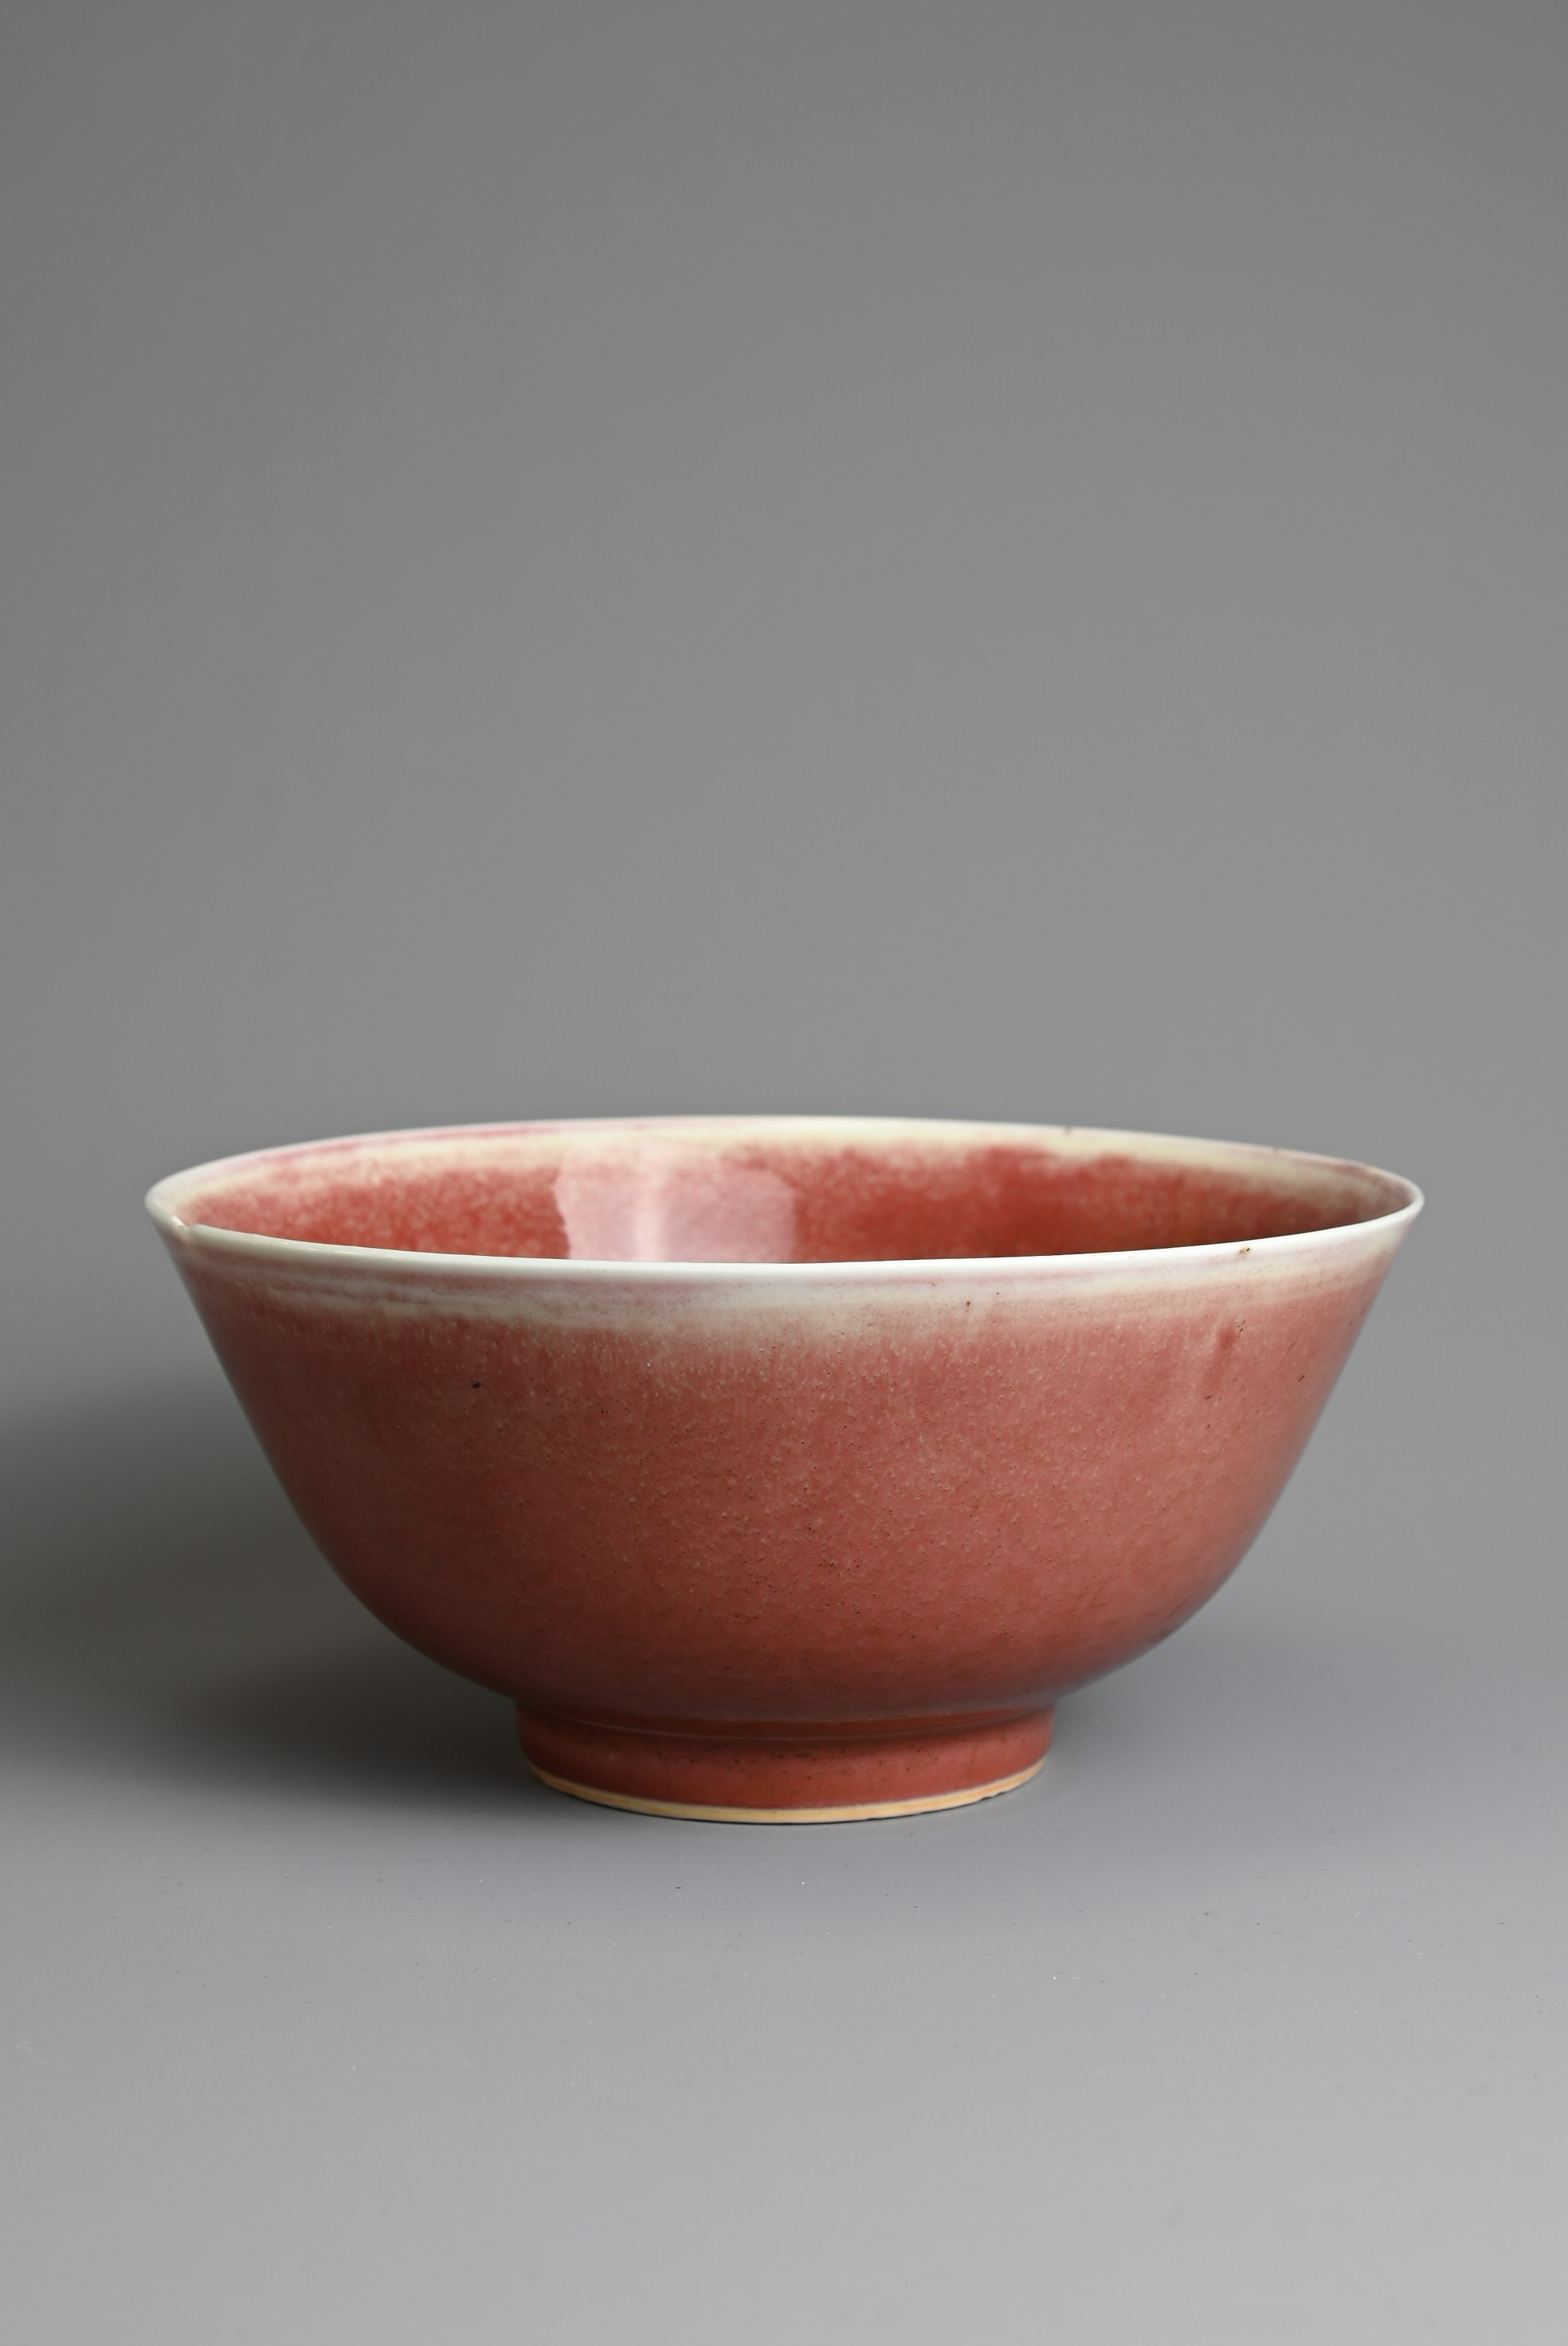 A CHINESE PEACH BLOOM GLAZED PORCELAIN BOWL, 18TH CENTURY. Rounded body with a gently everted rim